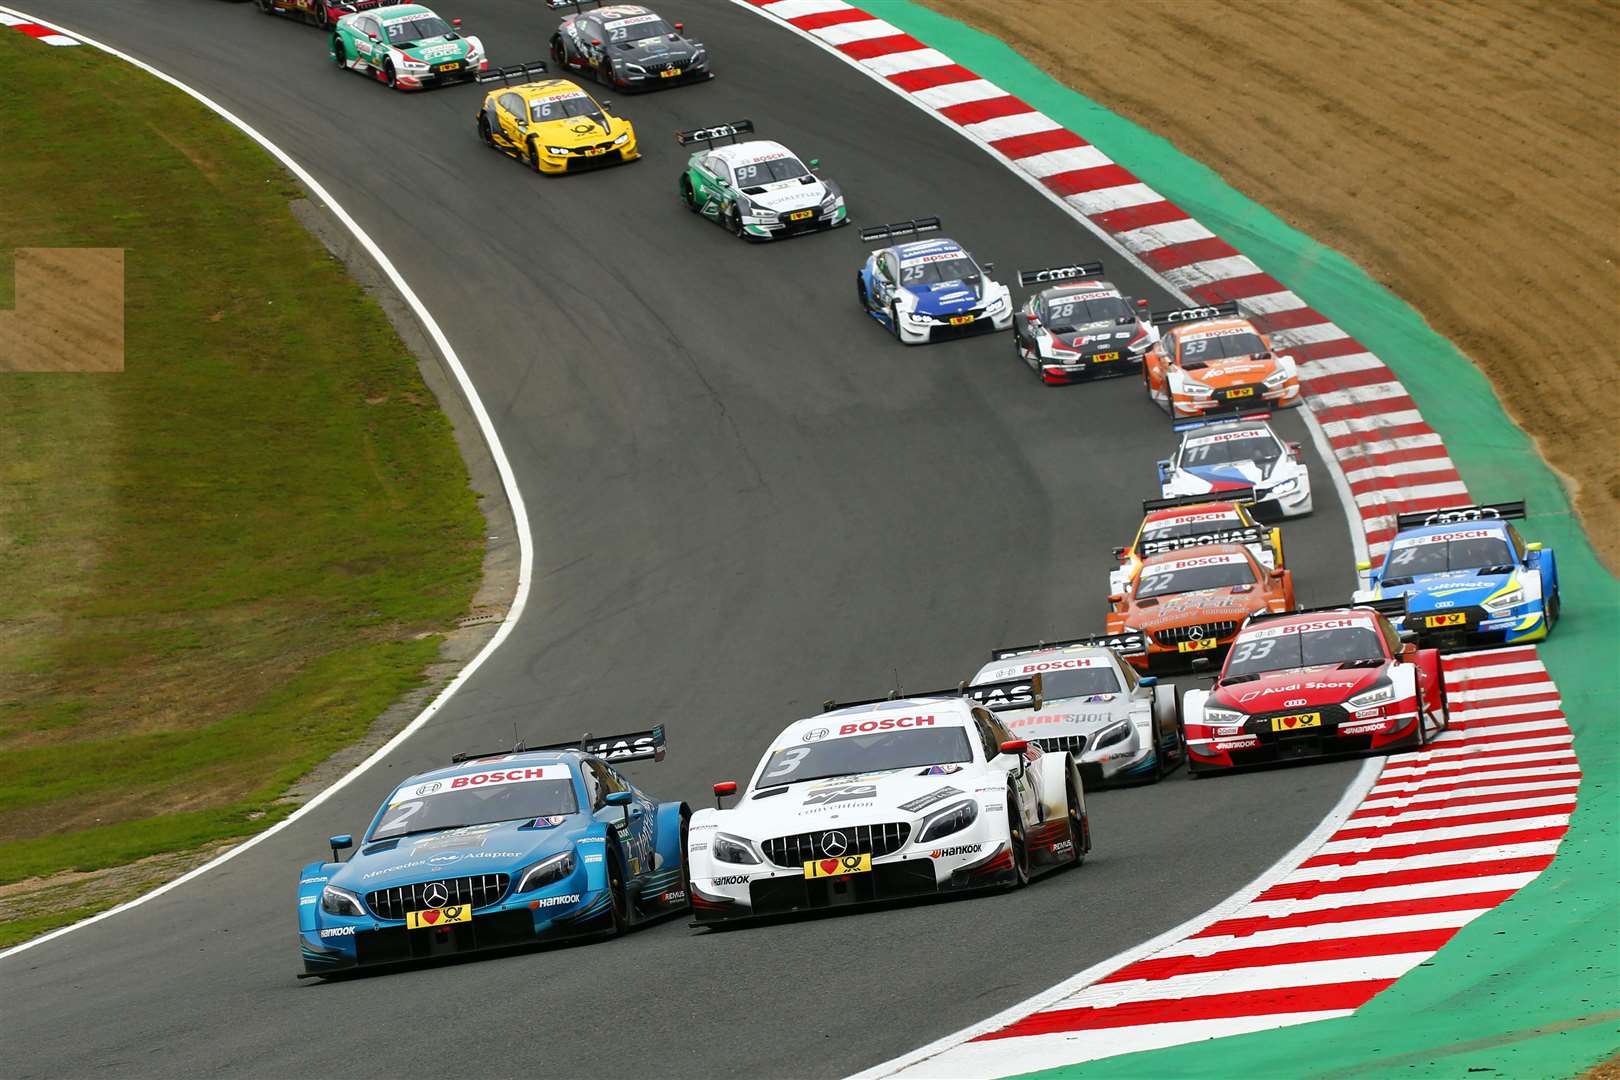 Paffett and di Resta go wheel-to-wheel on Sunday. Picture: DTM